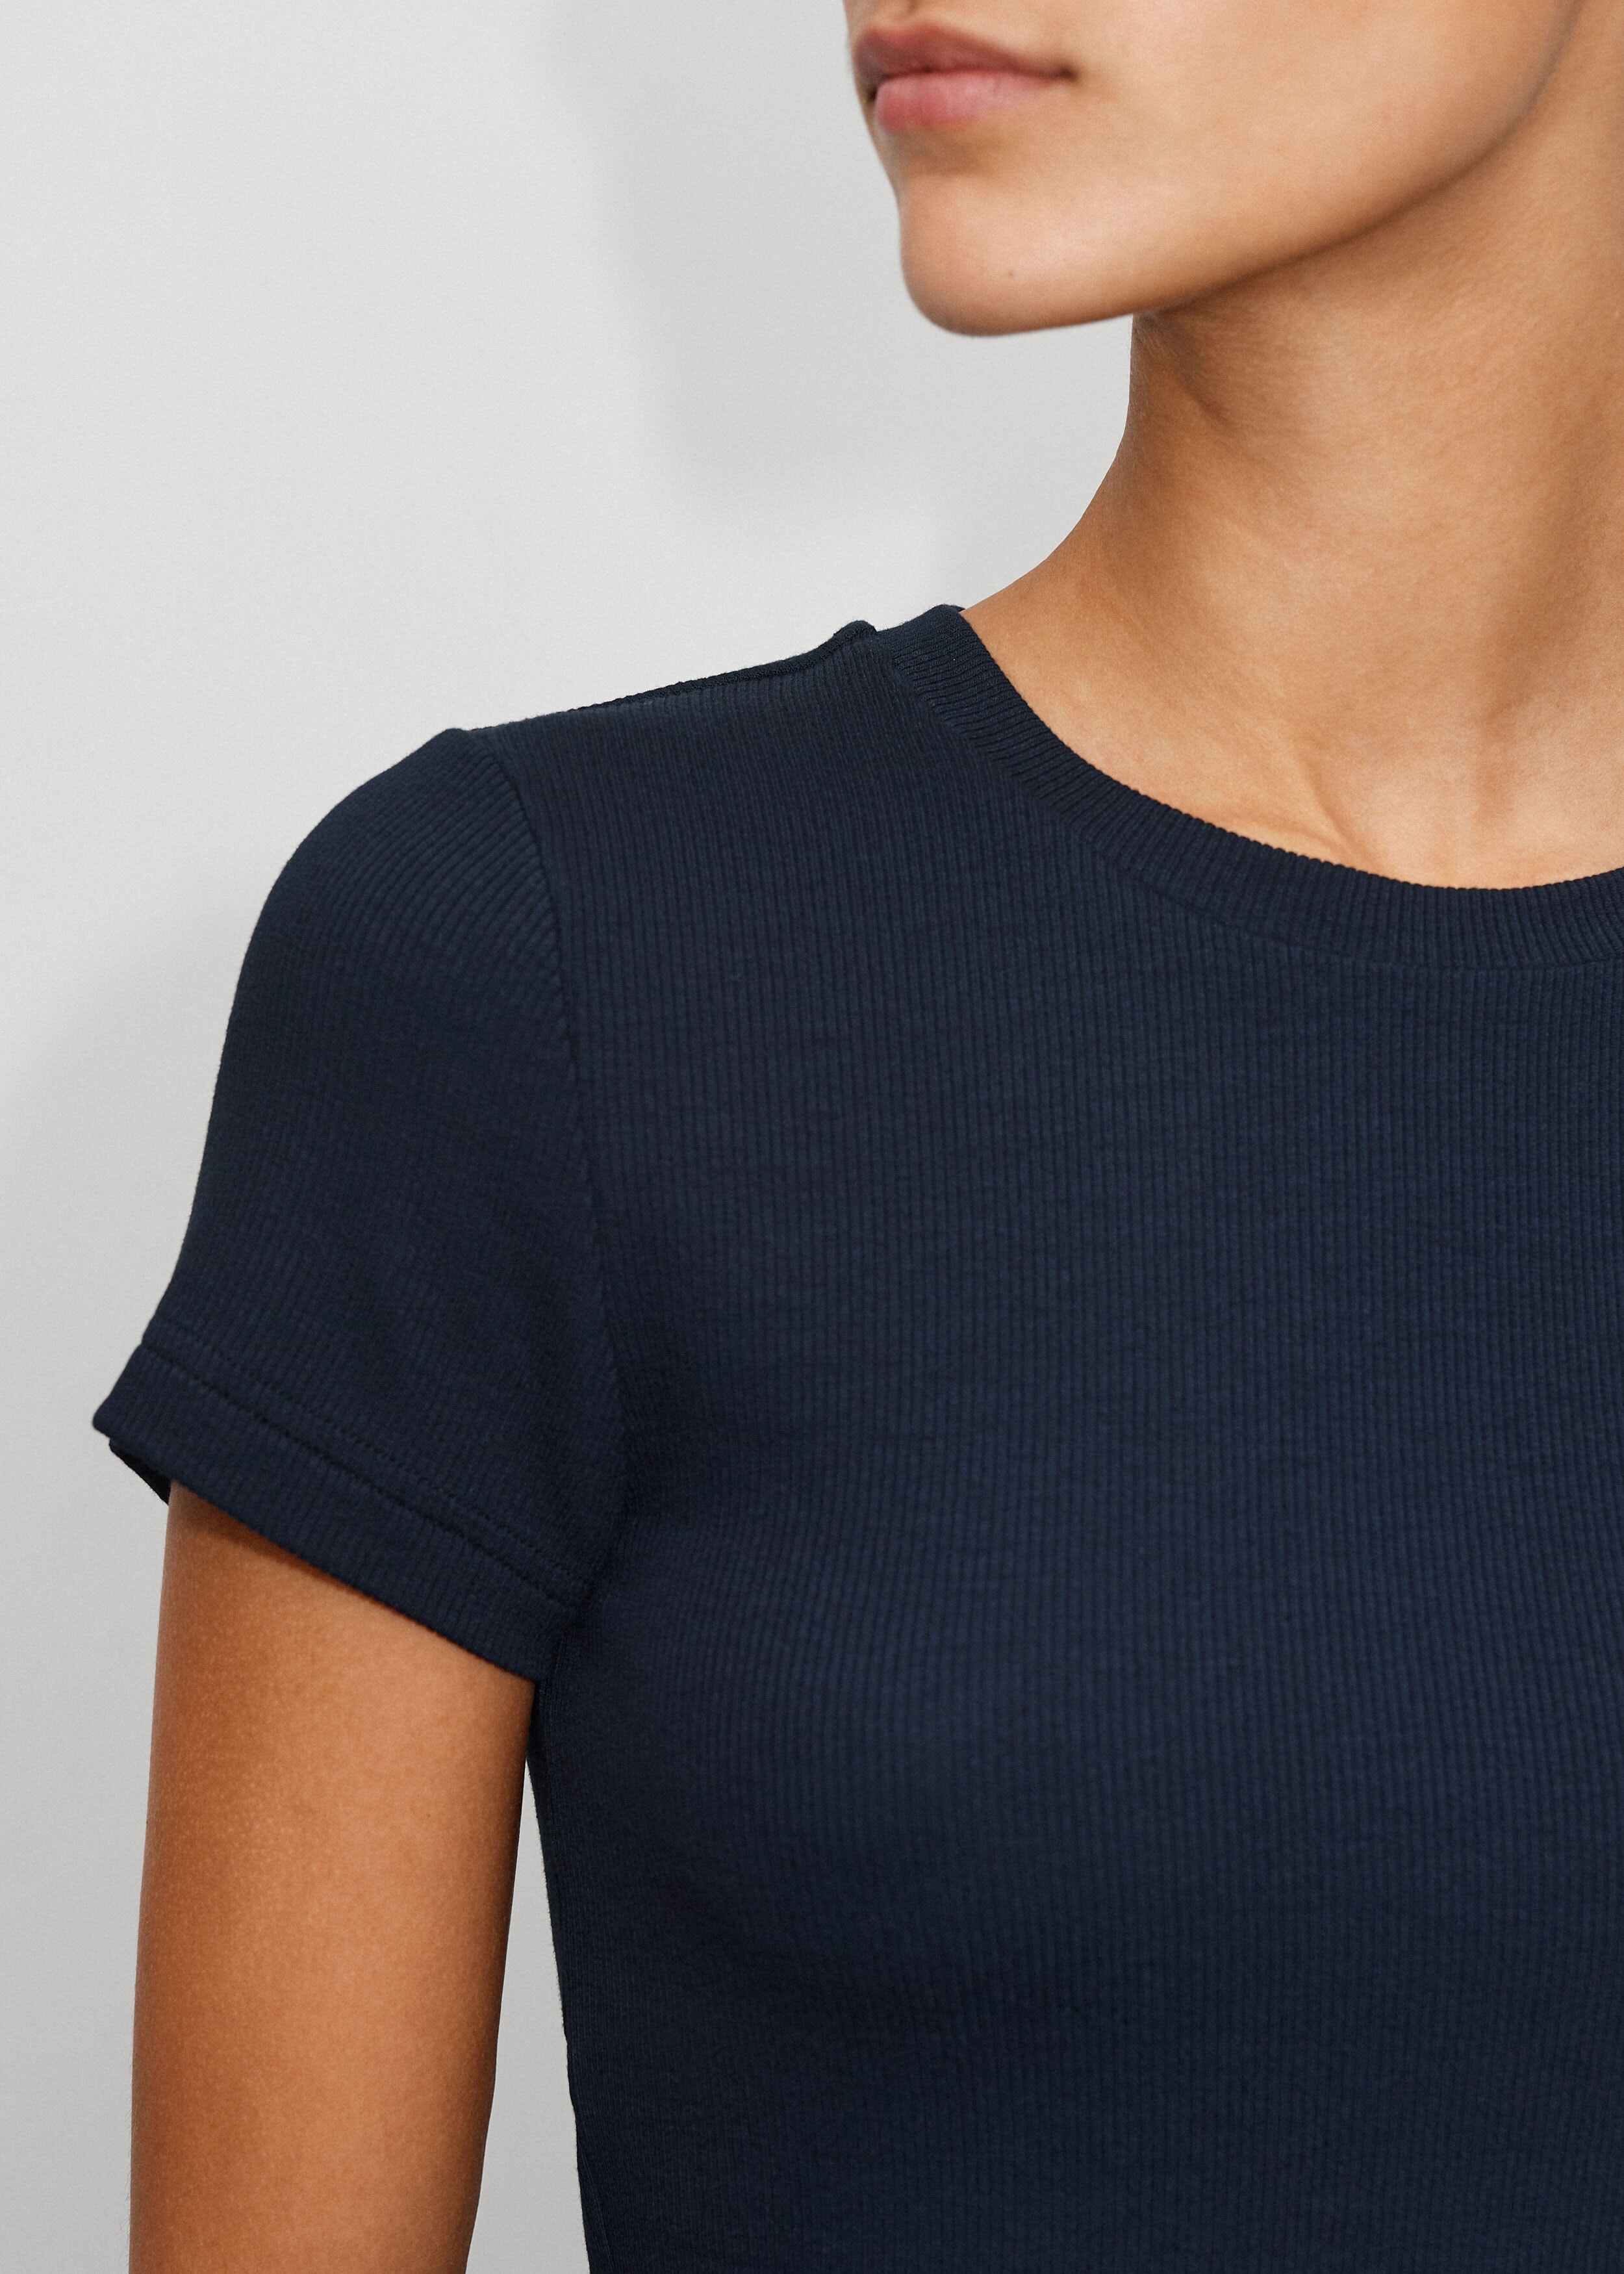 Fitted Rib Tee Navy